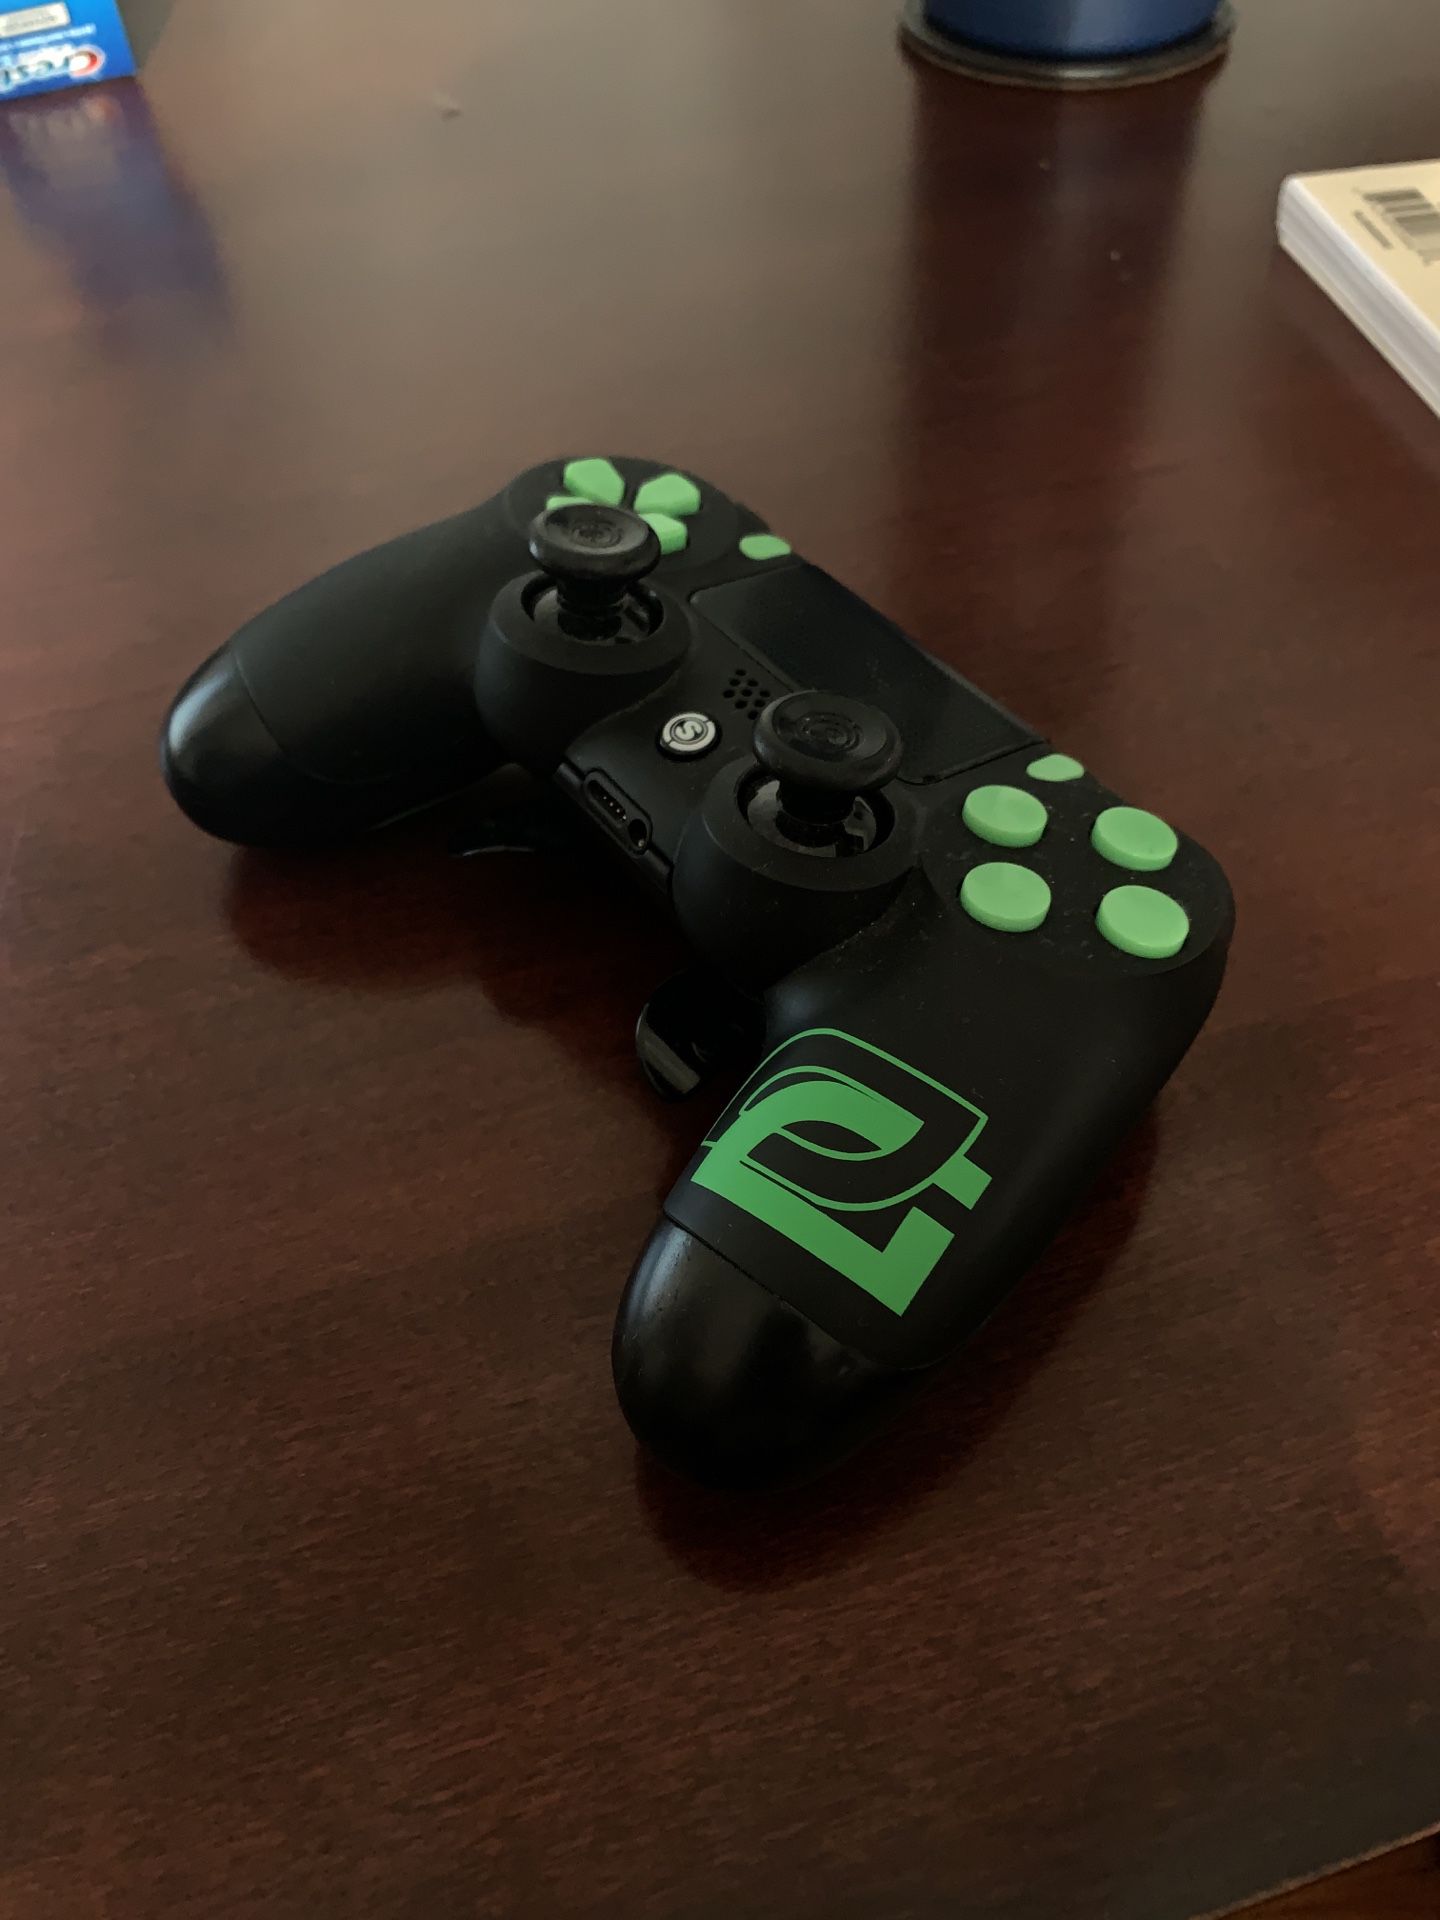 Scuf controller by Optic Matte Black & Green - Black ops 4 for Sale in Bellevue, WA - OfferUp